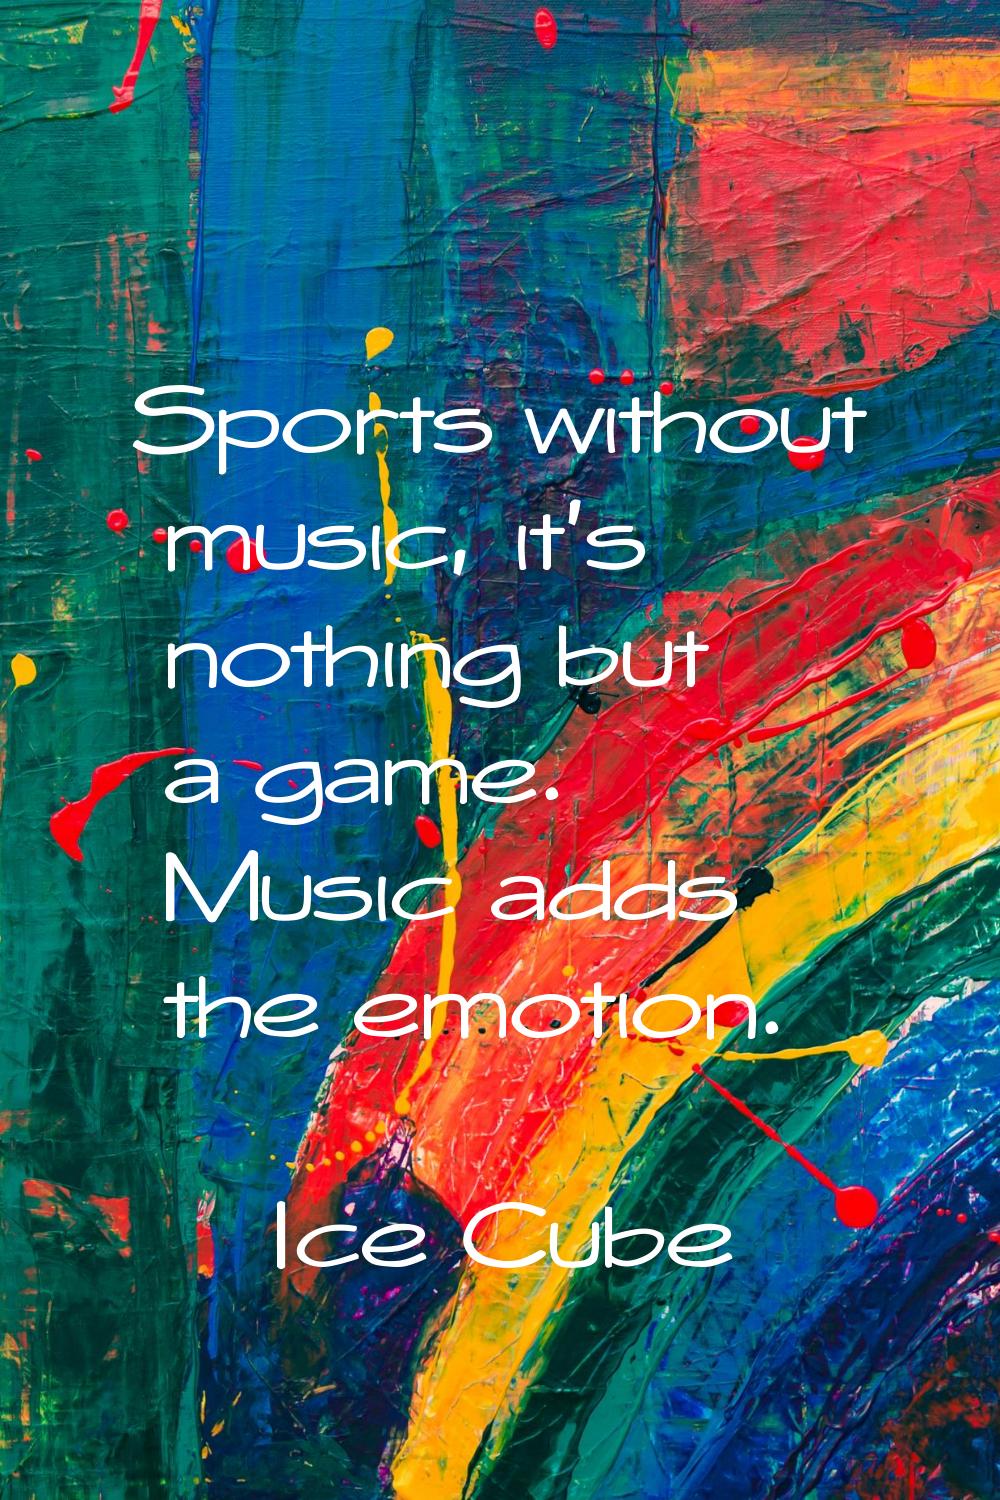 Sports without music, it's nothing but a game. Music adds the emotion.